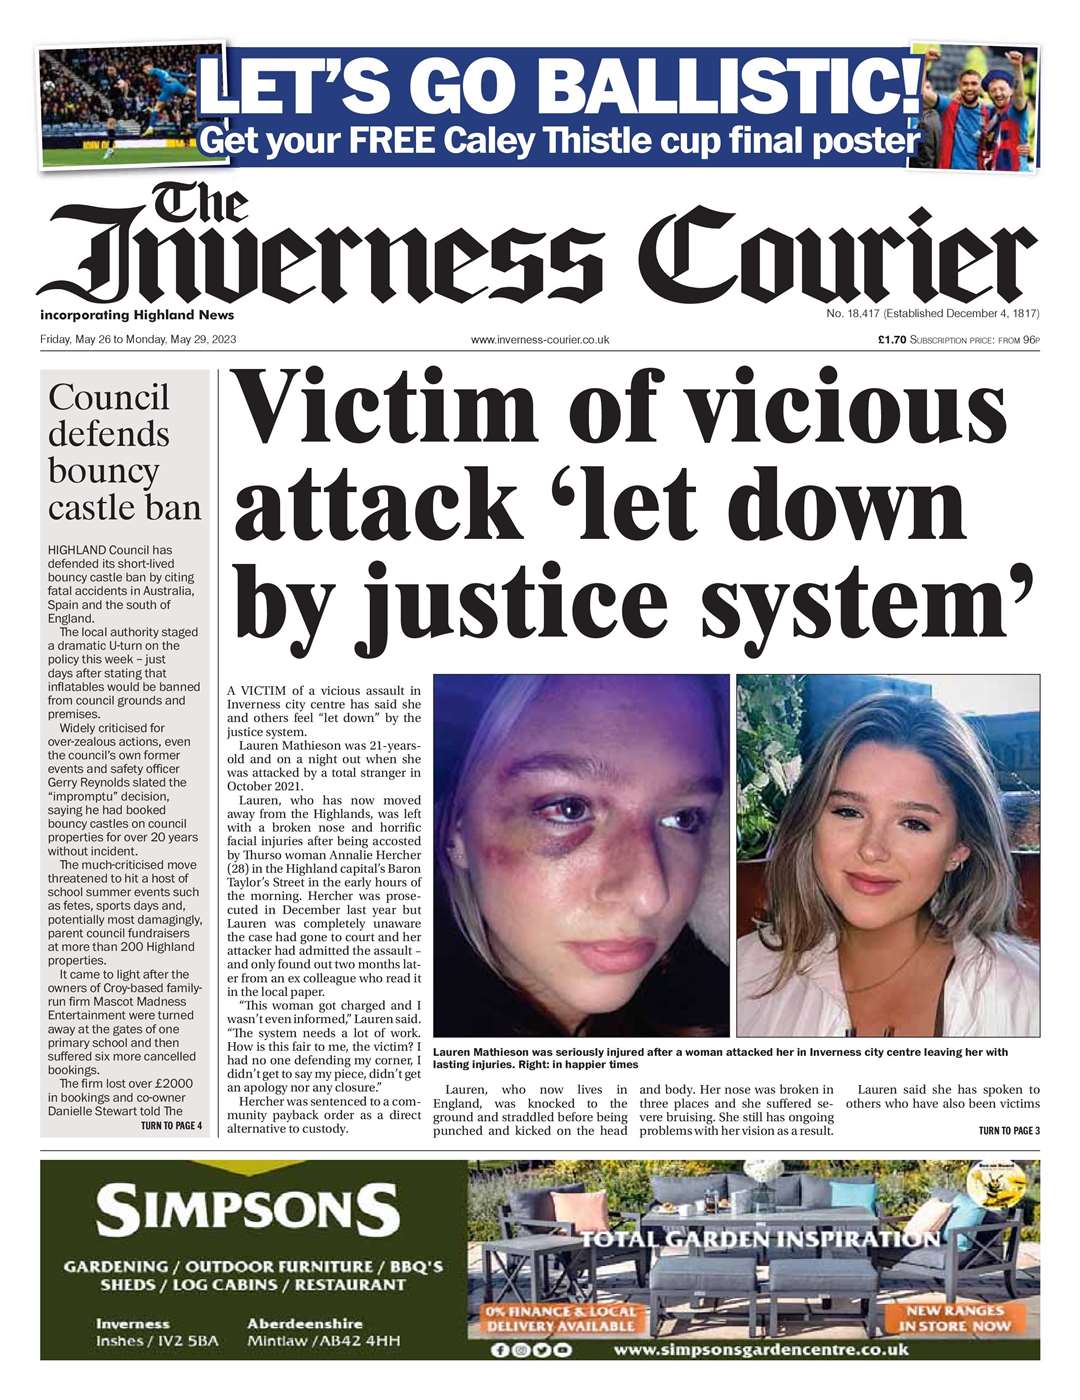 The Inverness Courier, May 26, front page.